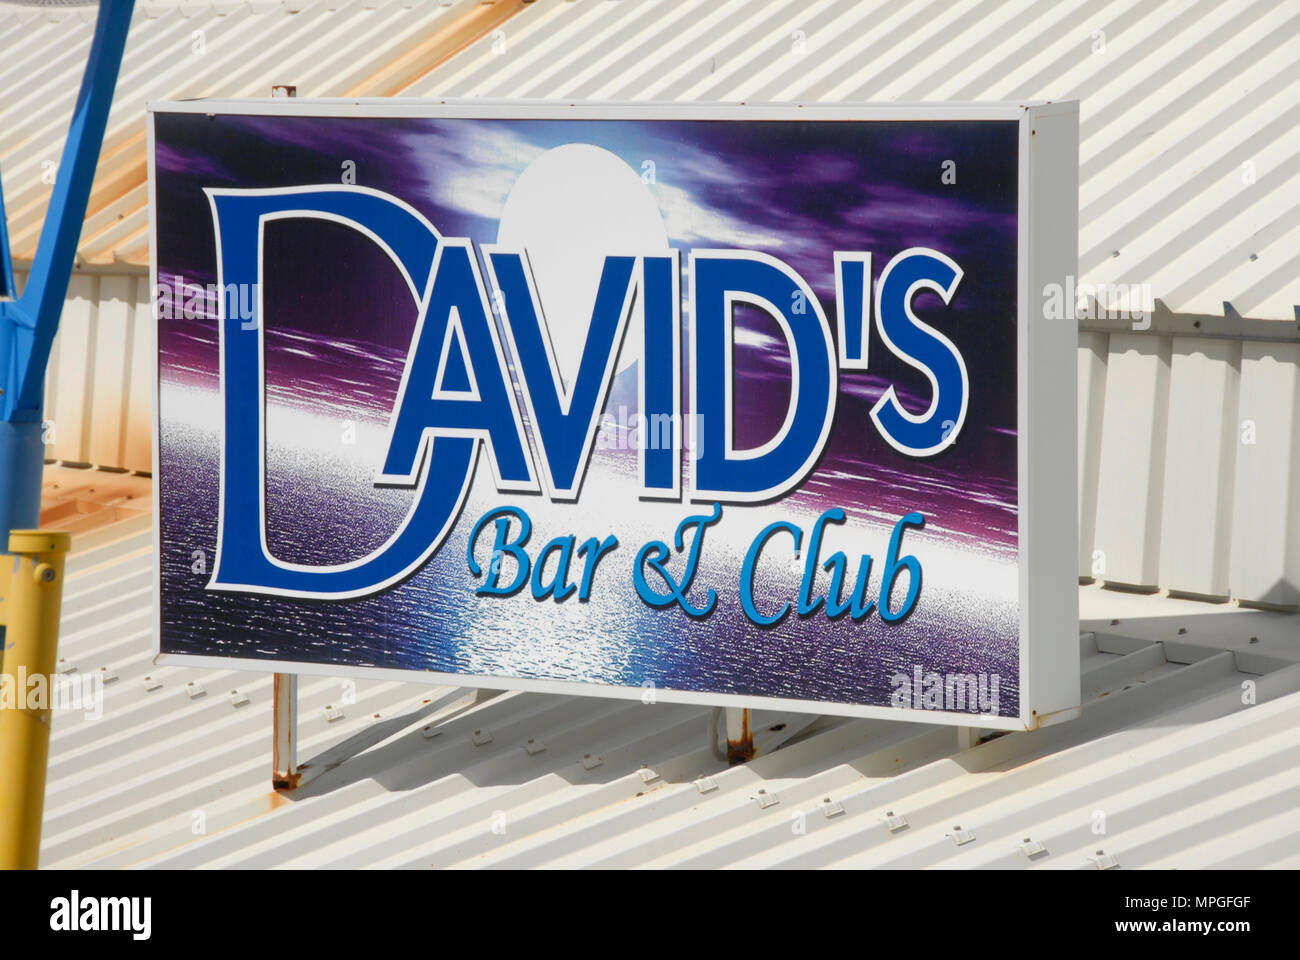 Large sign for David's bar and club, St Martin, Caribbean Stock Photo